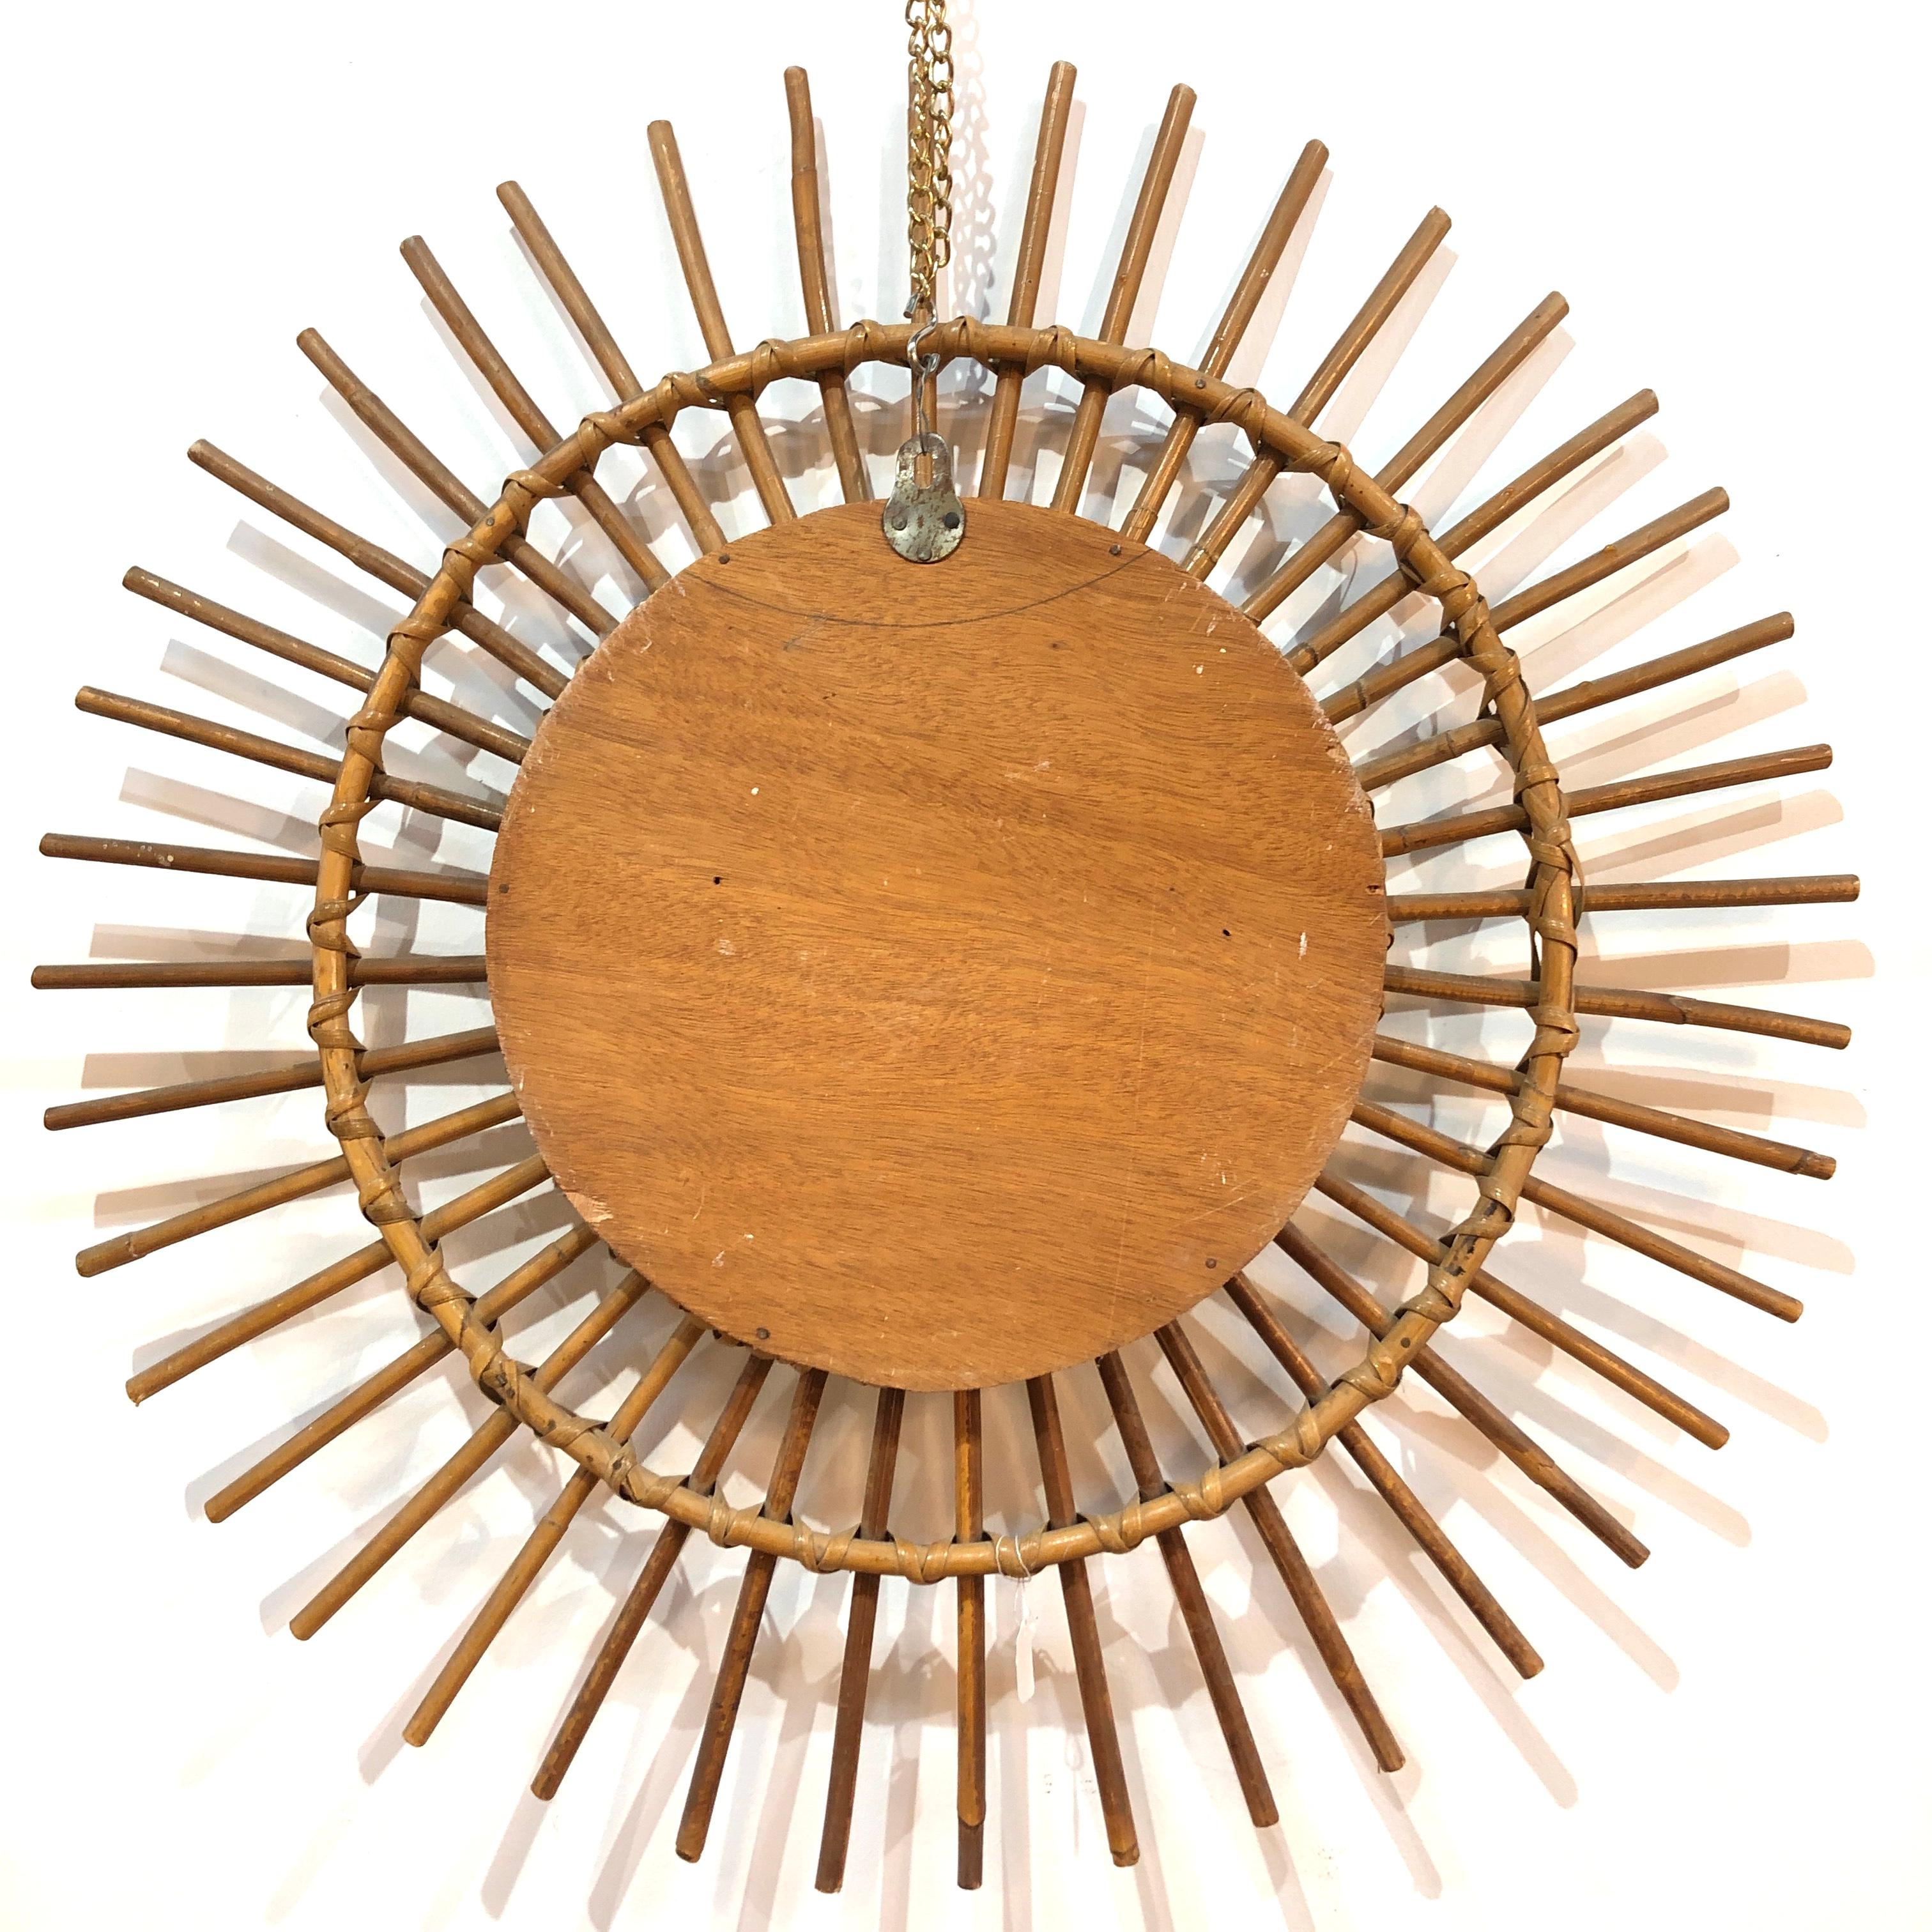 Delightful sun-shaped round mirror in braided rattan and bamboo. Produced in Italy during 1960s.
This beautiful mirror features a double frame with fantastic rattan wicker weaves, the frames are decorated by straight rattan beams.

Sourced in Lyon